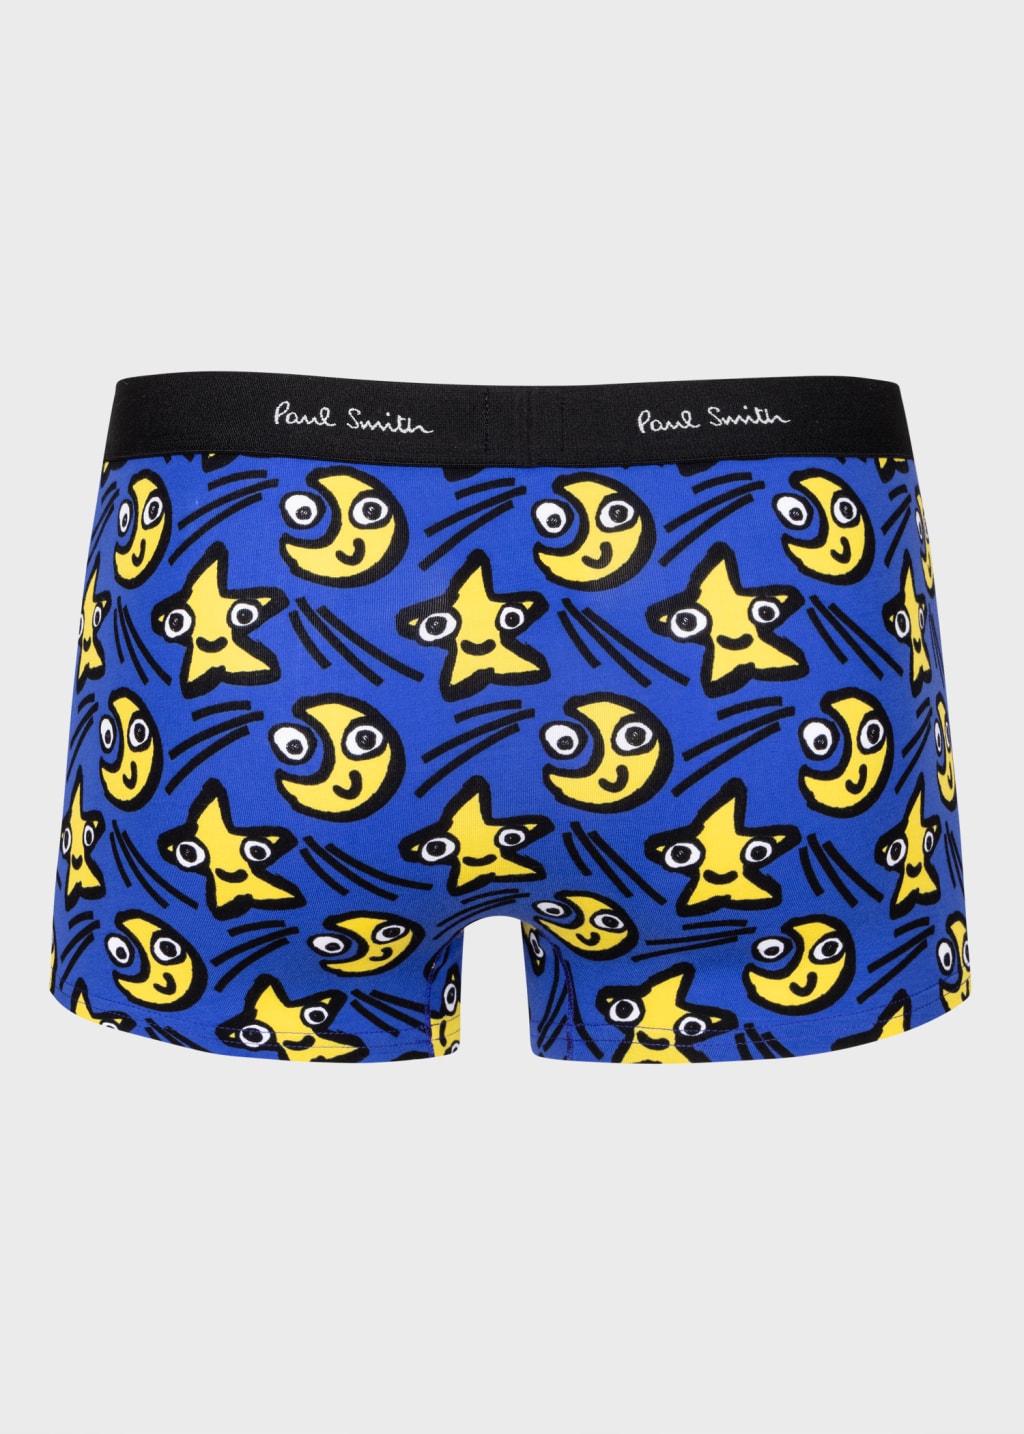 Back View - Blue 'Star And Moon' Print Trunks Paul Smith